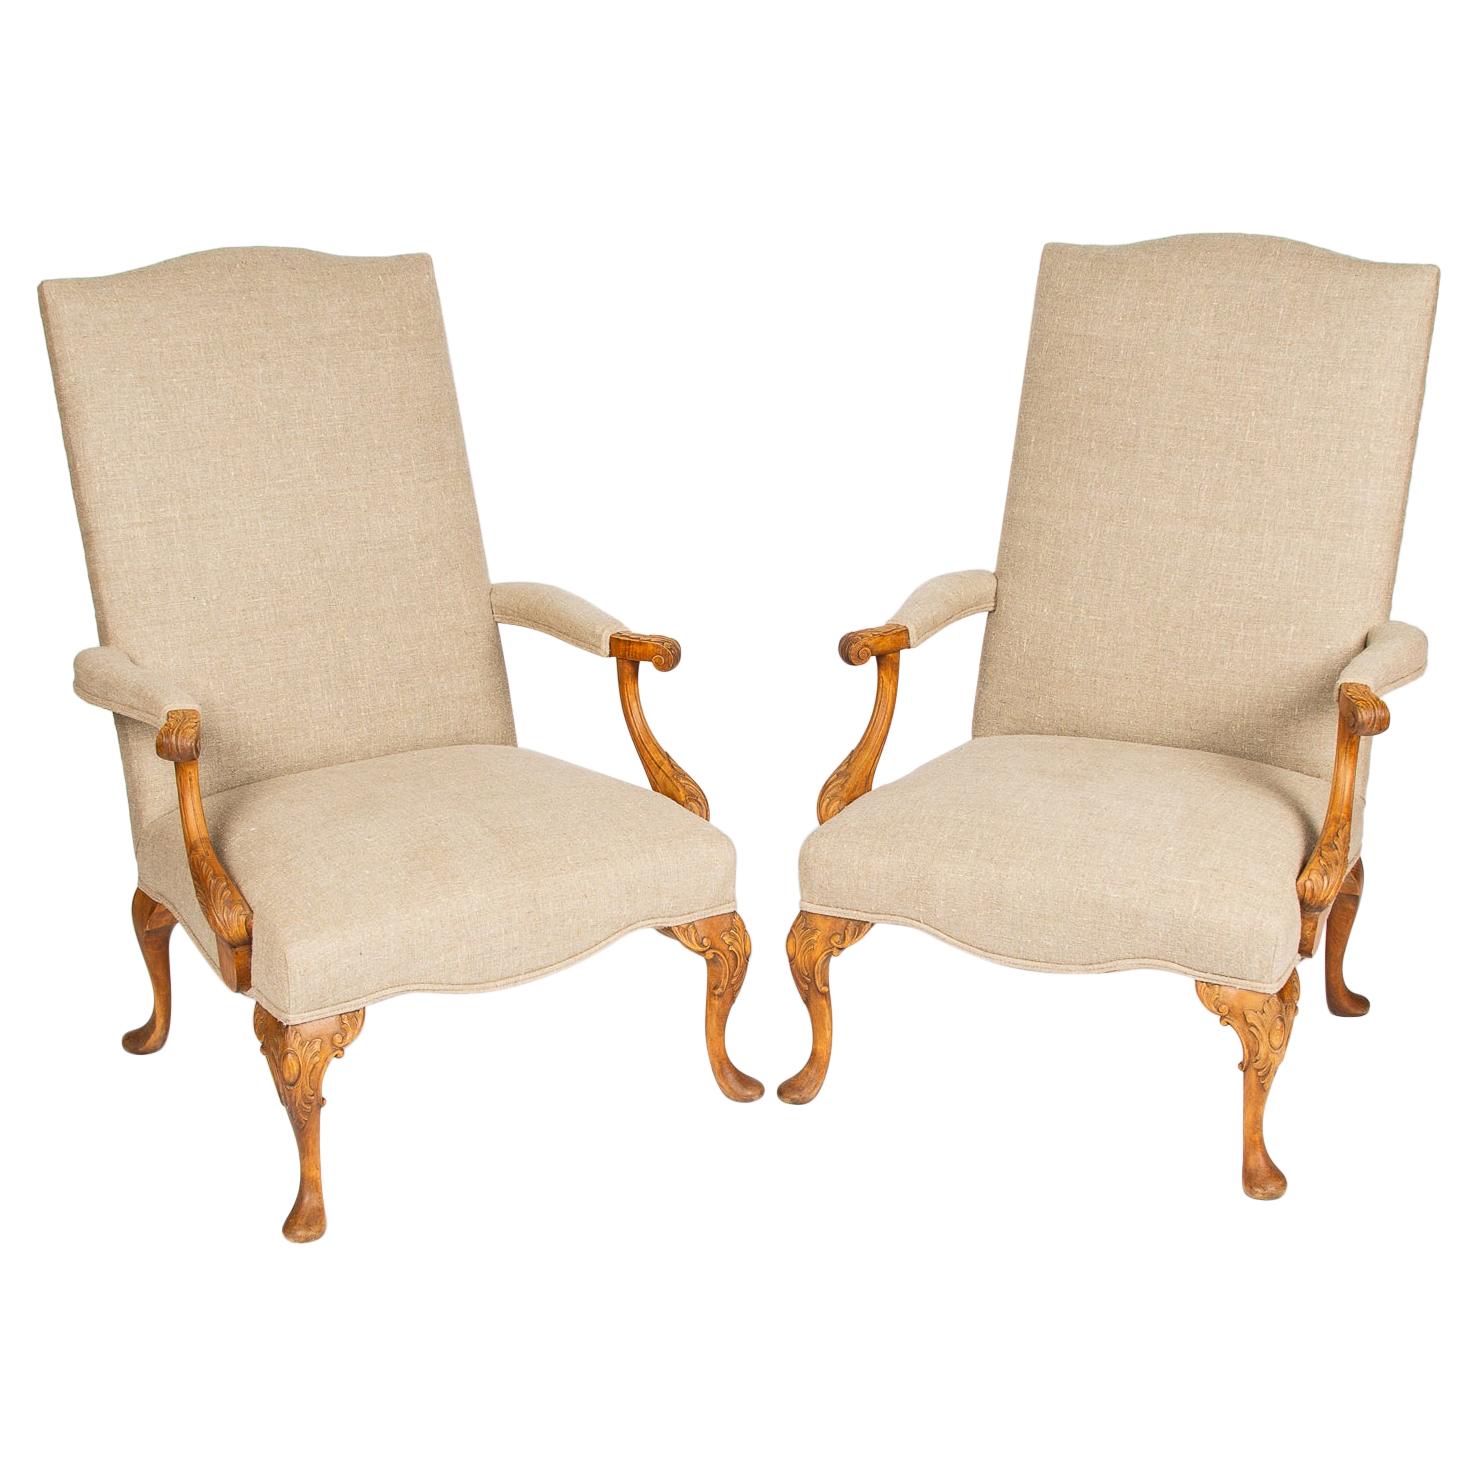 Pair of High Back Armchairs with Carved Arms, Cabriole Legs & Feet For Sale